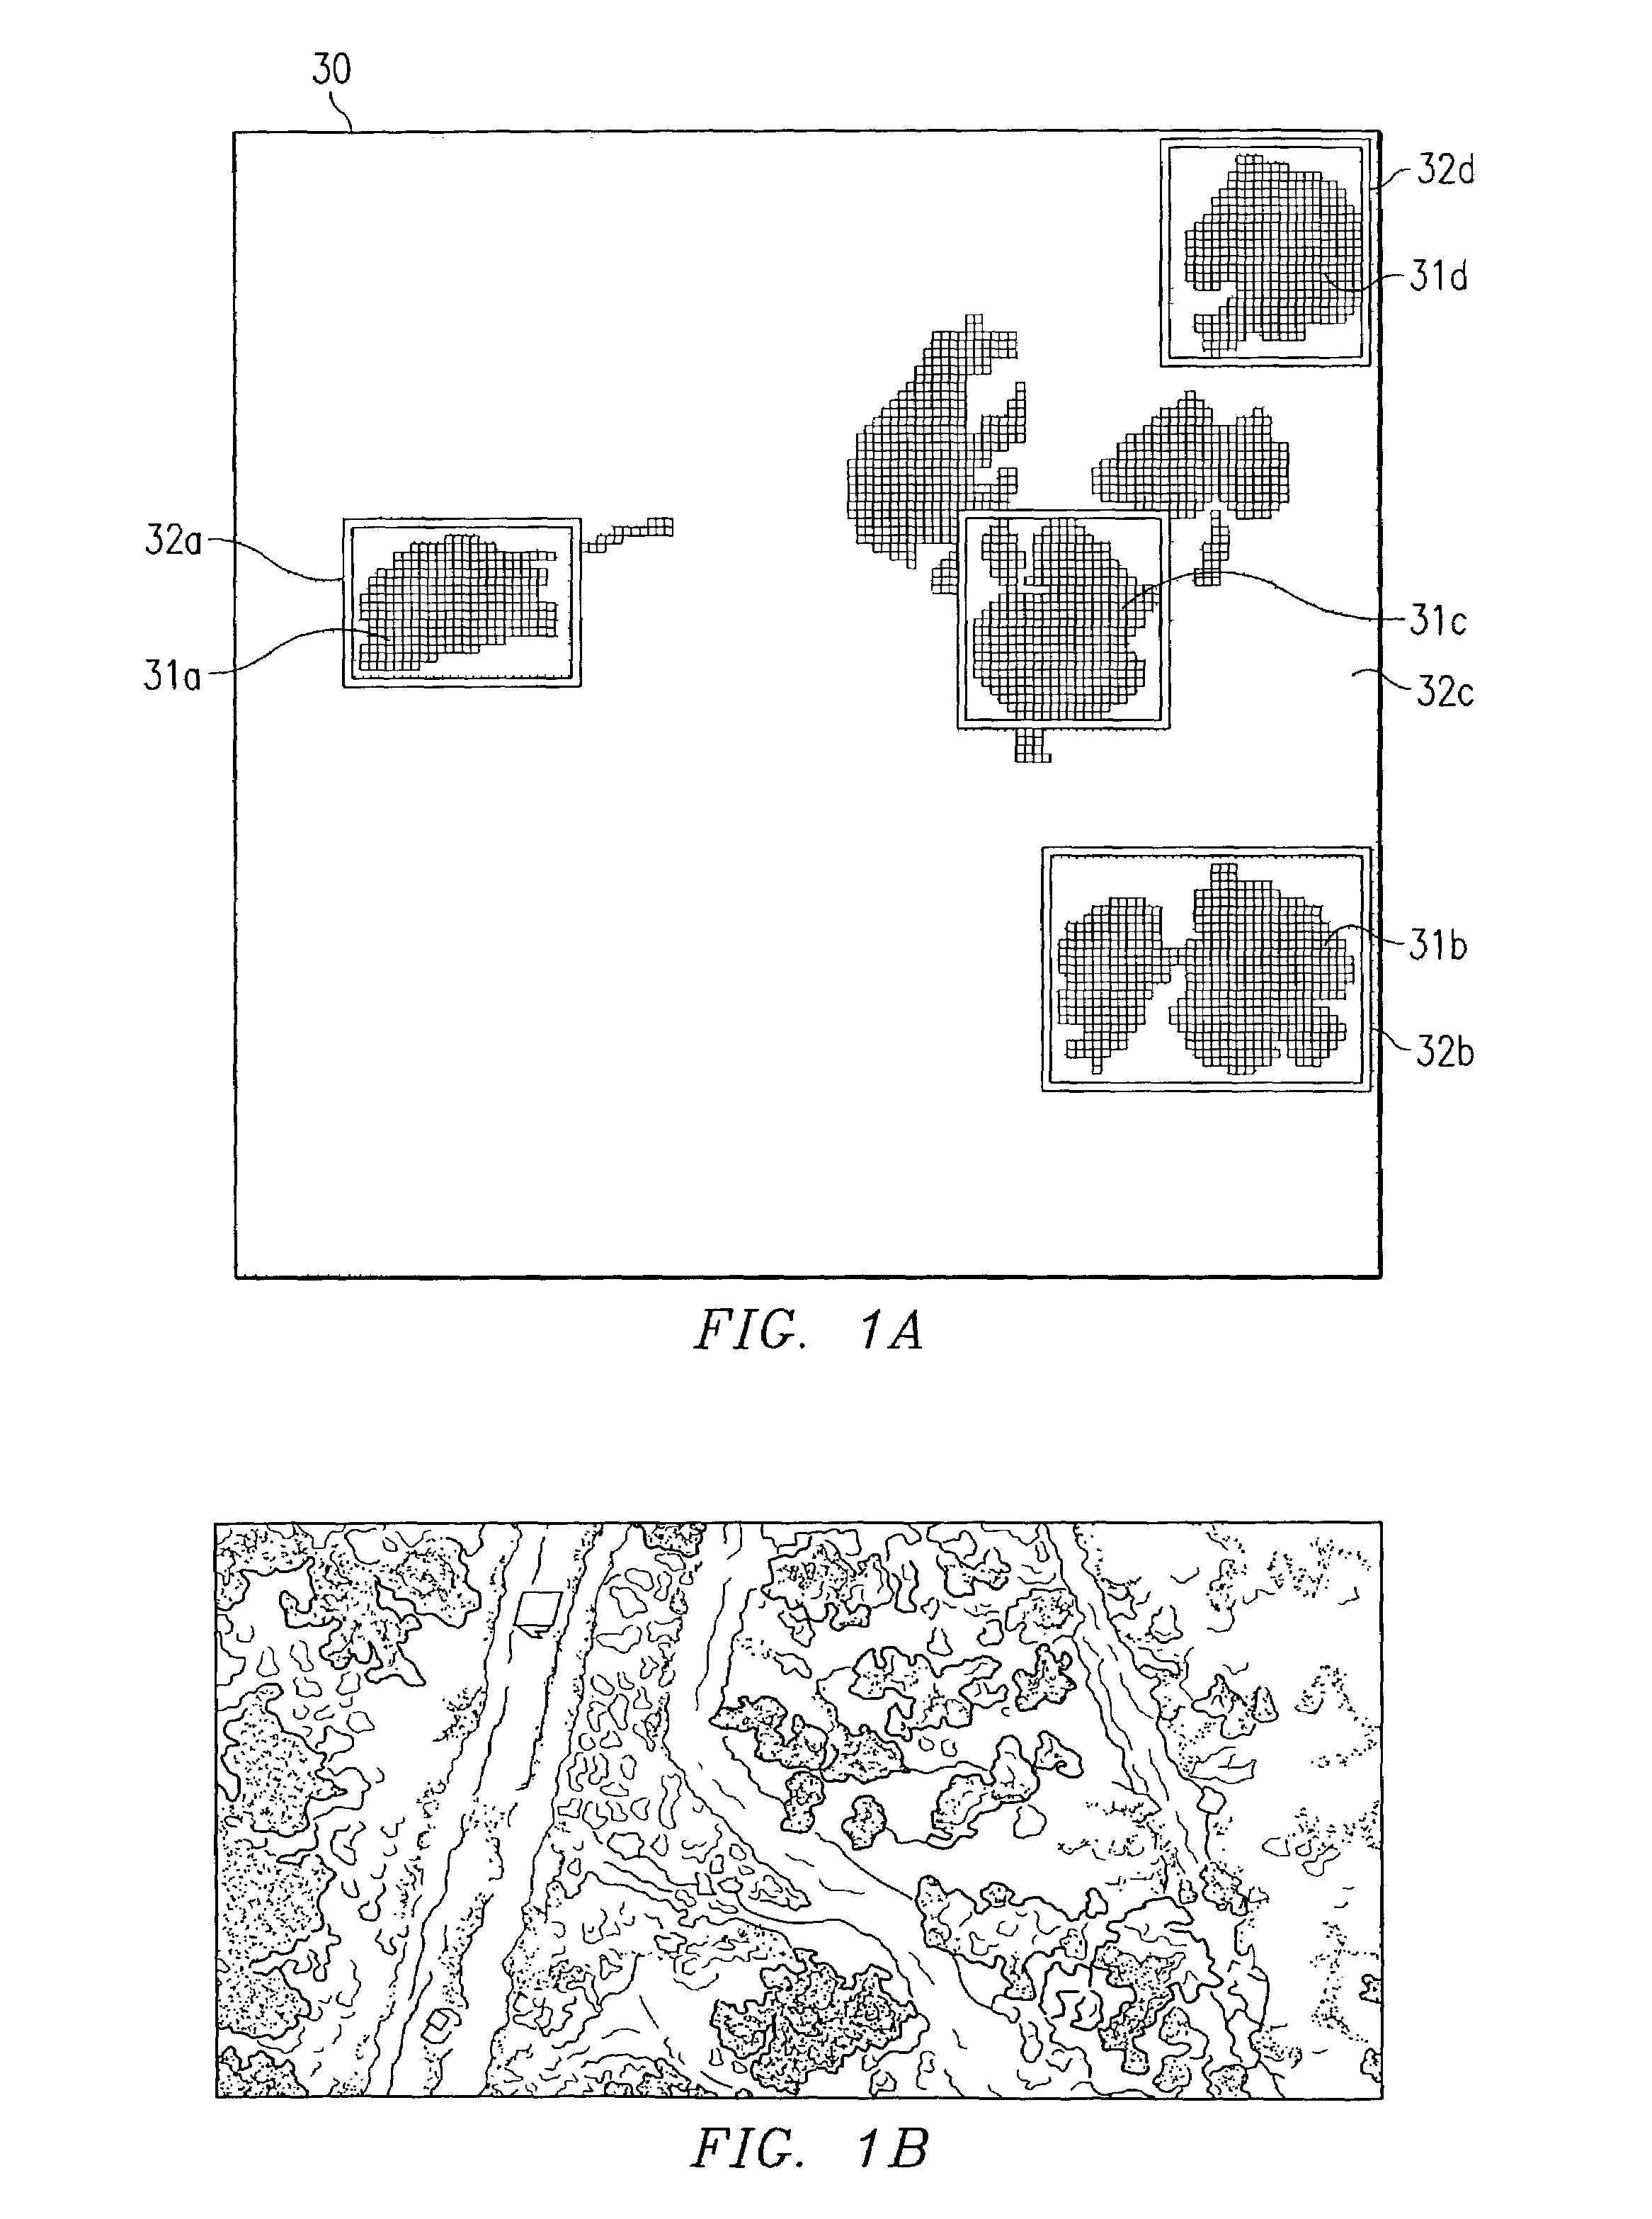 System and method for image analysis using a chaincode